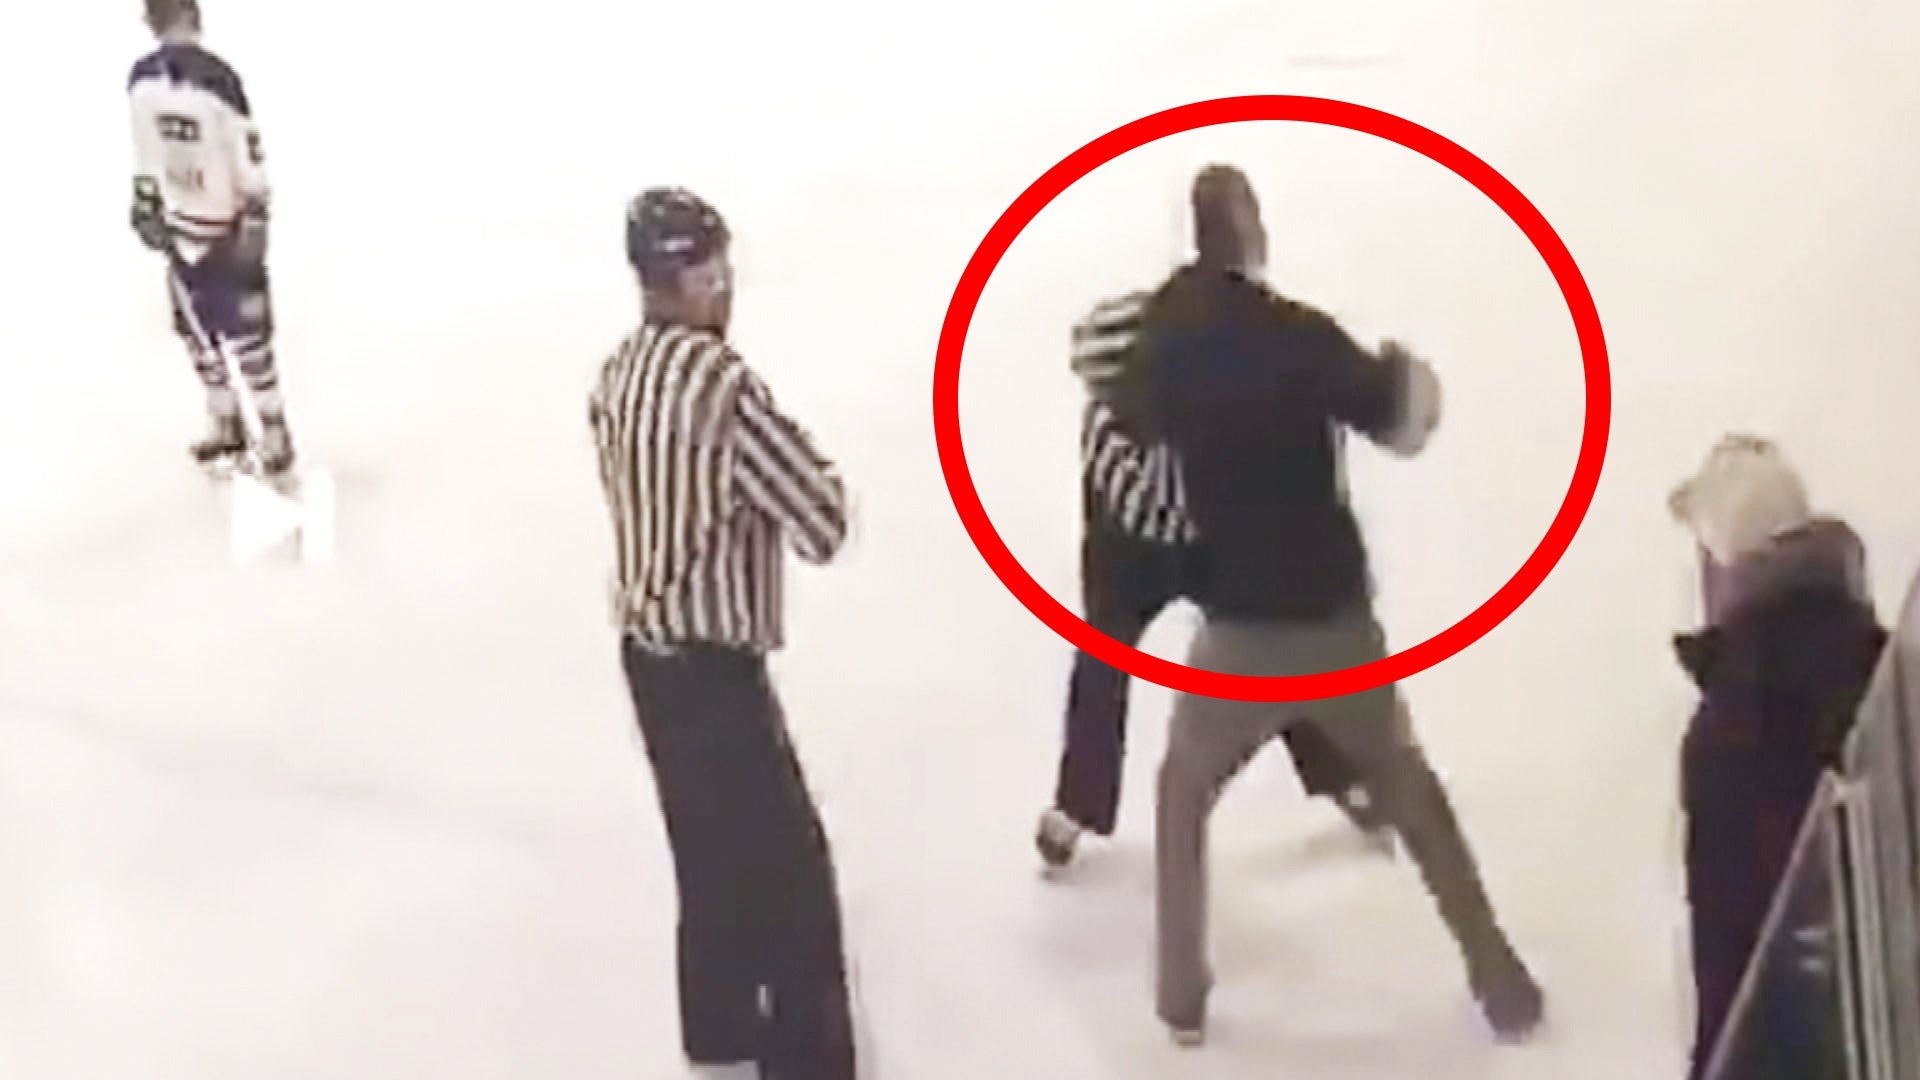 Referees' decision leaves NHL player feeling unsafe - HockeyFeed